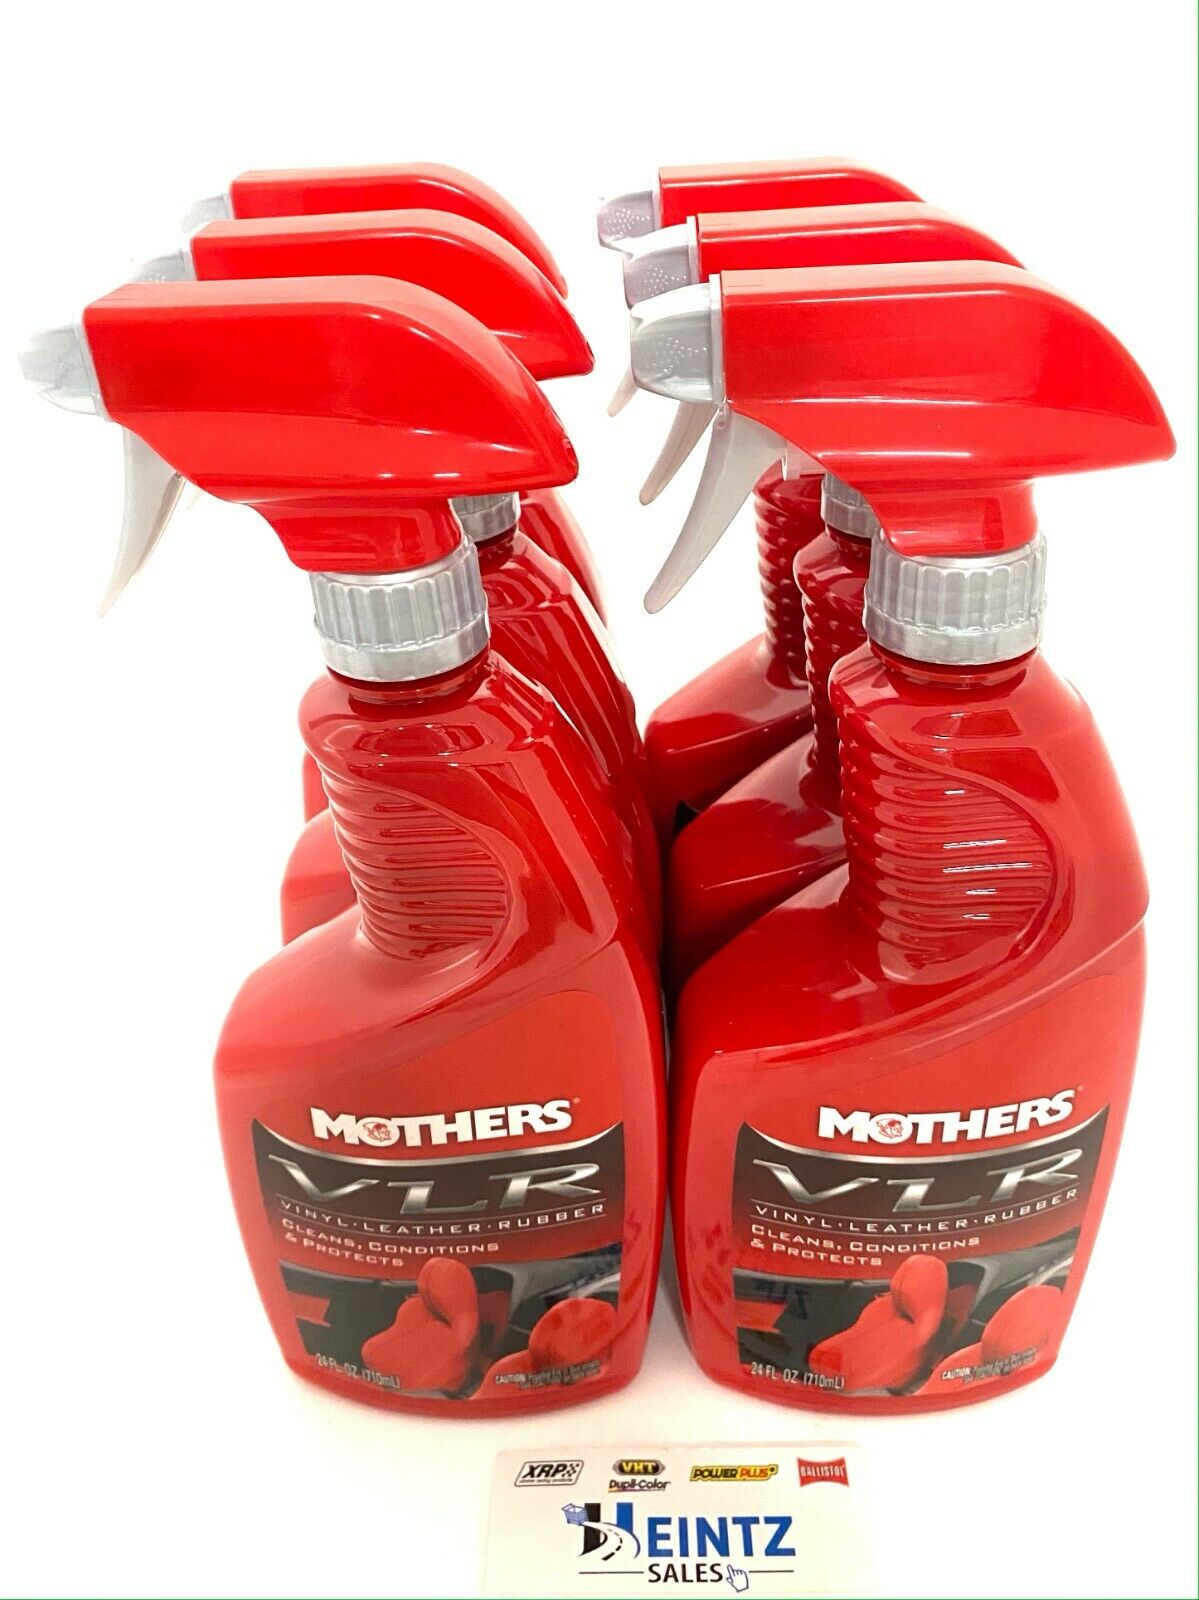 MOTHERS 06524 VLR Vinyl Leather Rubber Care 6 PACK - Conditions & Protects  - 24 oz. 